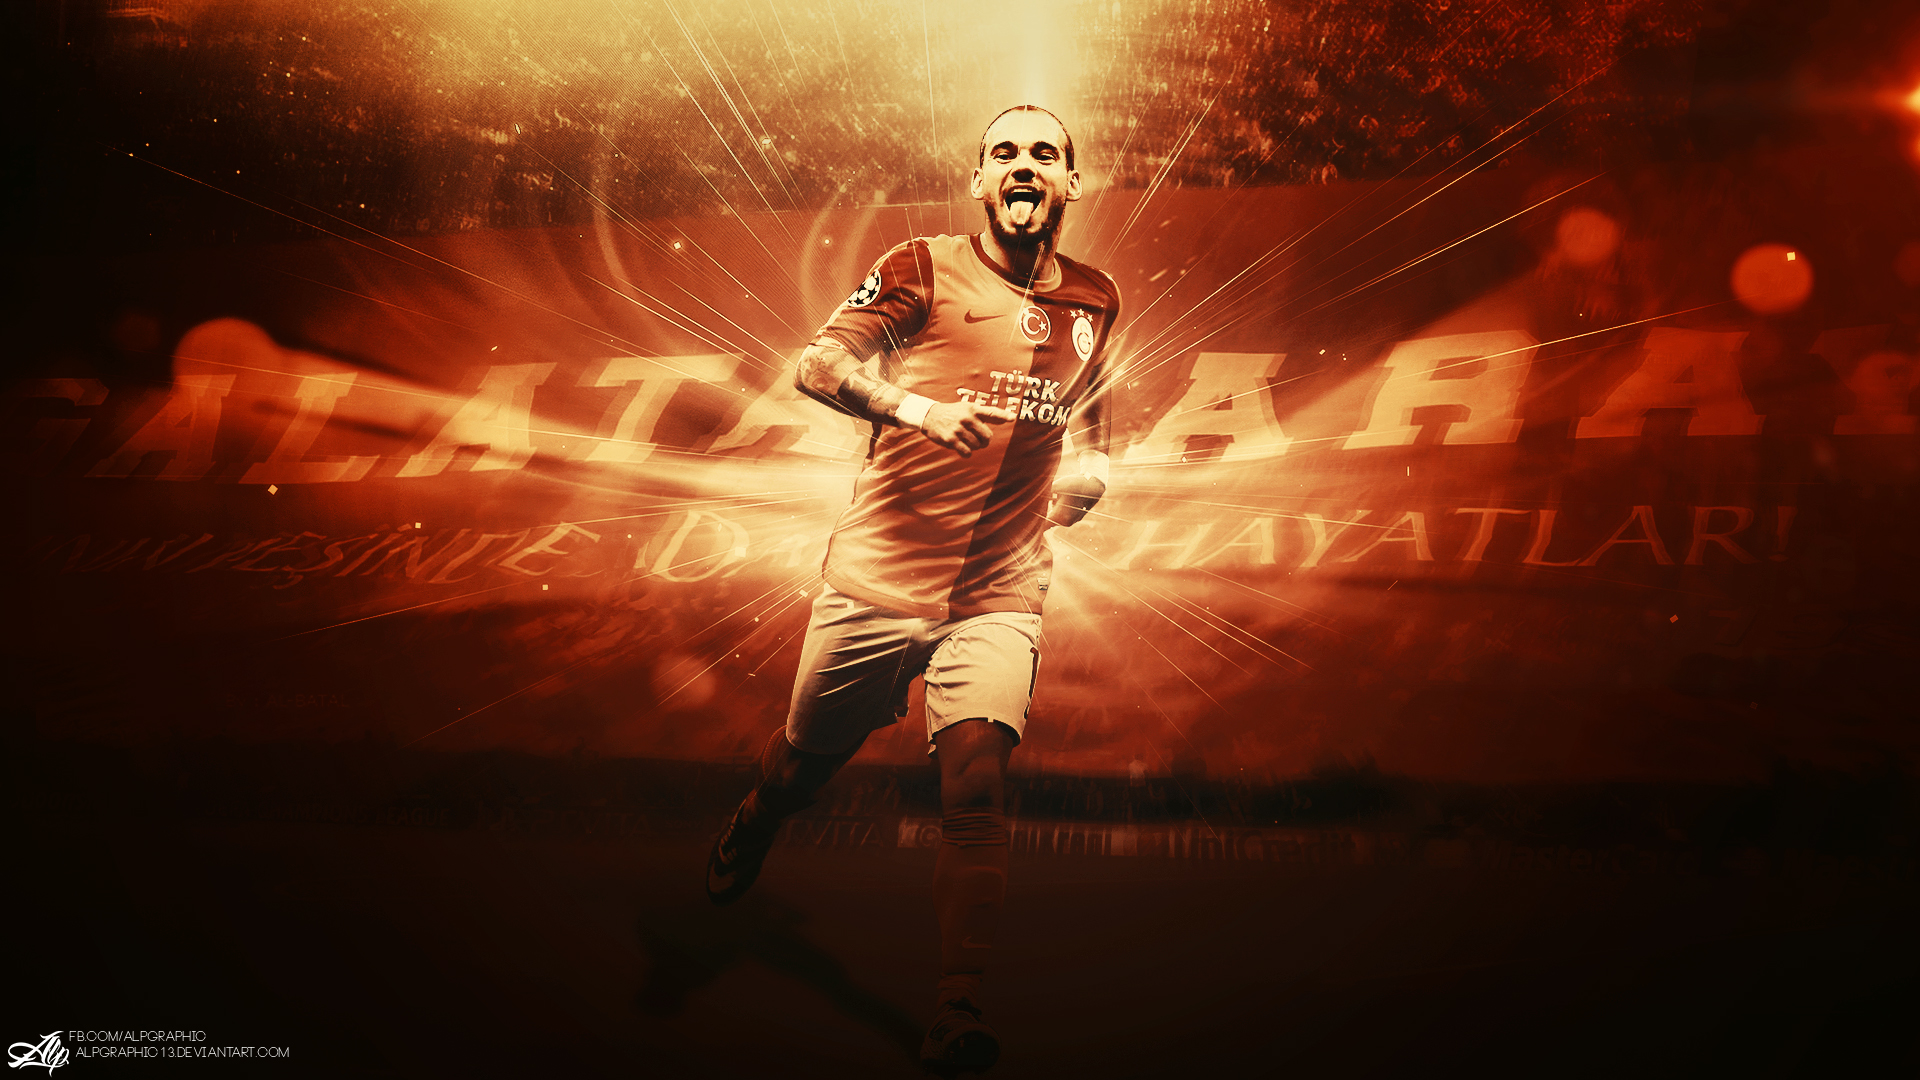 Wesley Sneijder Wallpaper By Alpgraphic13